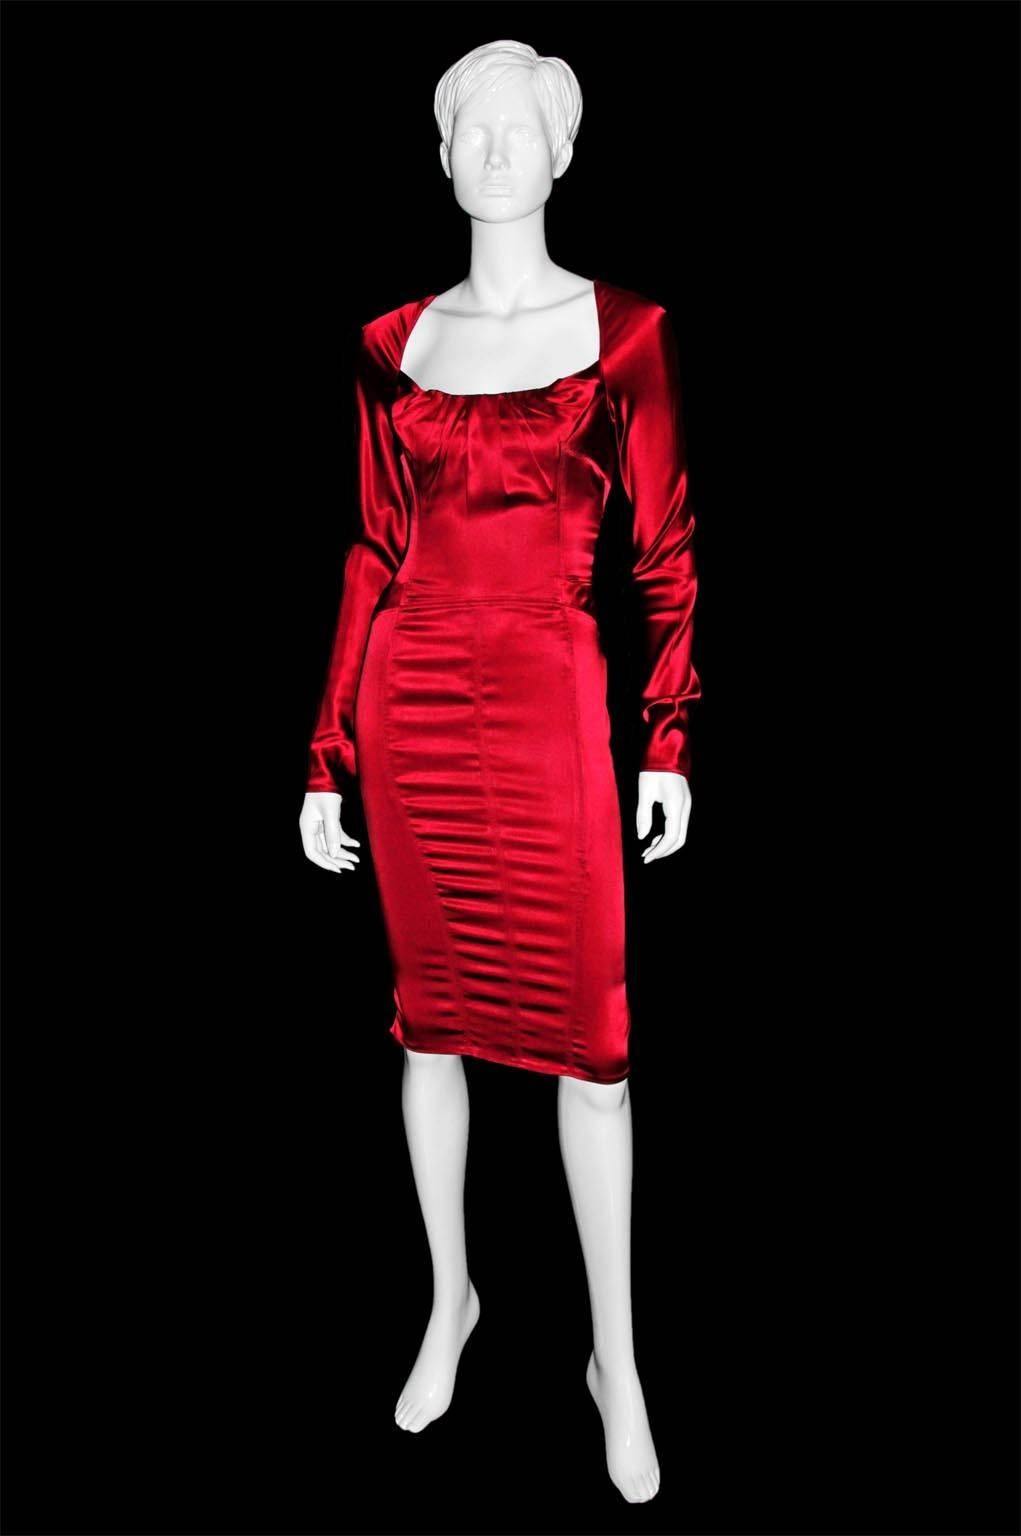 Uber Rare & Iconic Tom Ford Gucci FW 2003 Cherry Red Silk Corseted Bustle Dress!

Considered by many to be his greatest collection of all, Tom Ford's fall winter 2003 collection for Gucci was simply awash with the most heavenly corseted gowns,